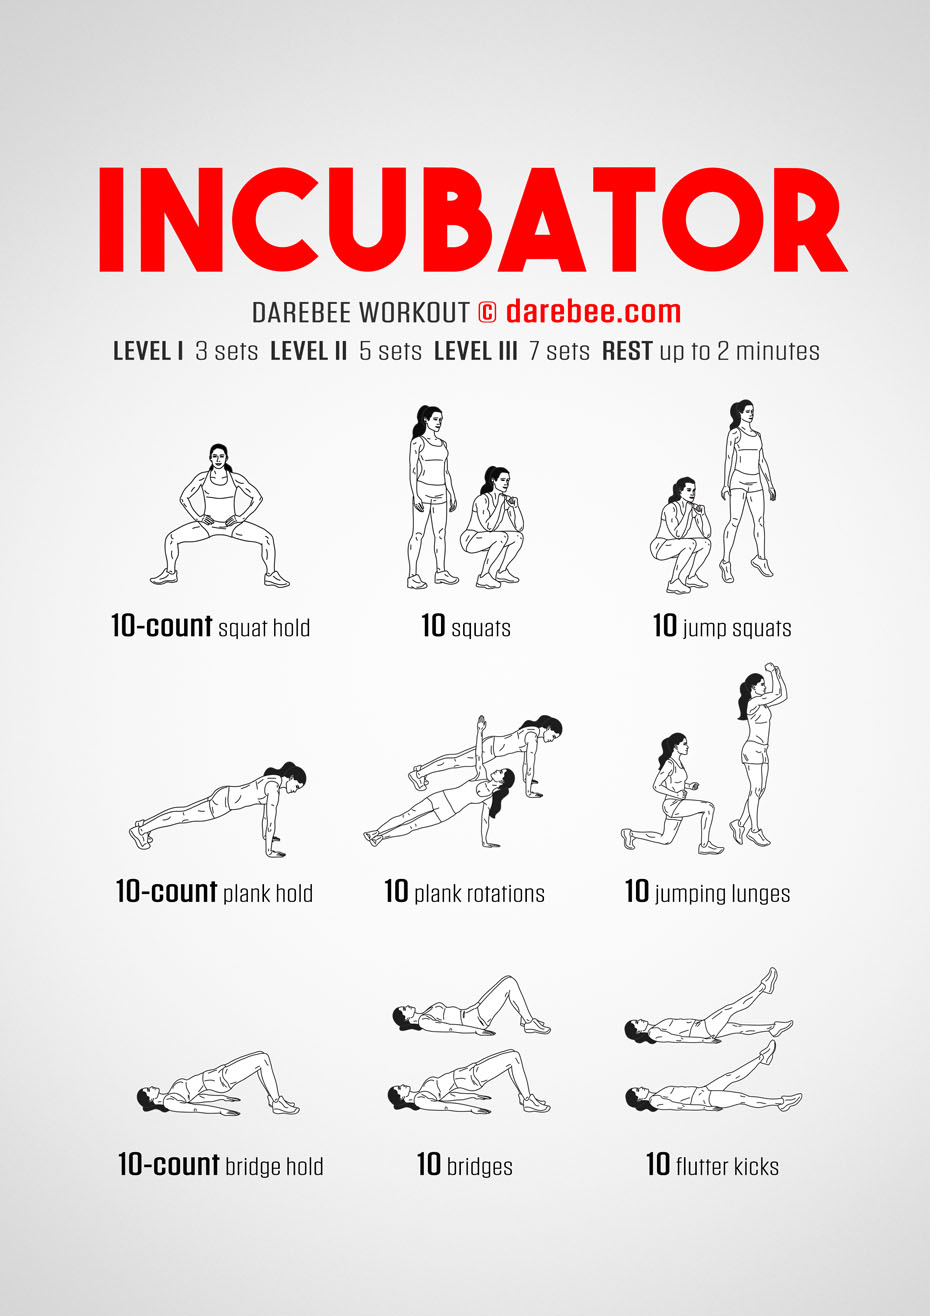 Incubator is a full body Darebee, home-fitness, strength workout you can do anywhere, any time.